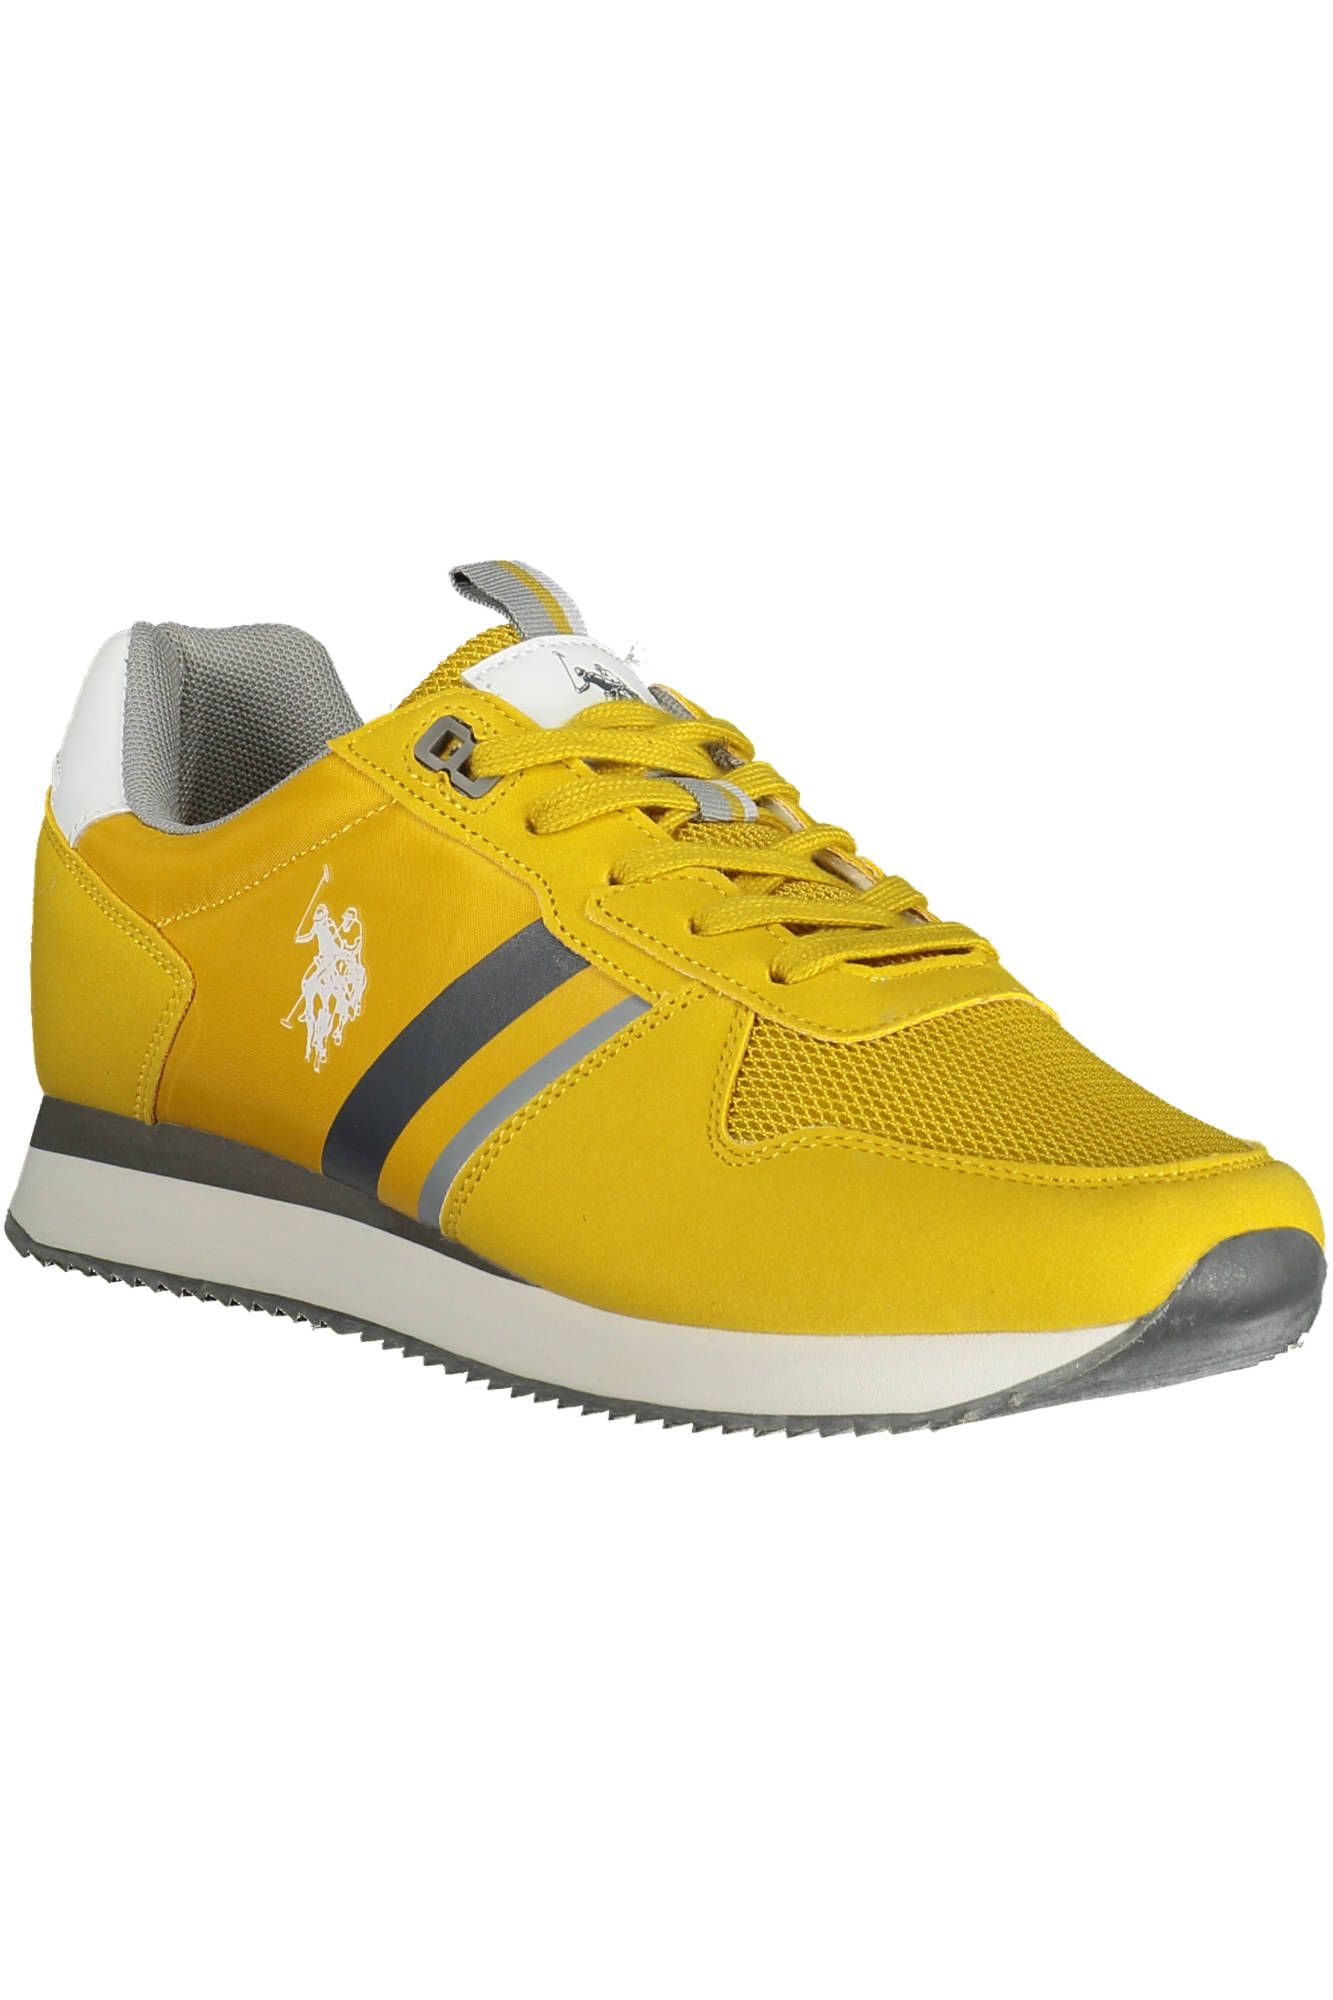 U.S. POLO ASSN. Radiant Yellow Sports Sneakers with Contrasting Details